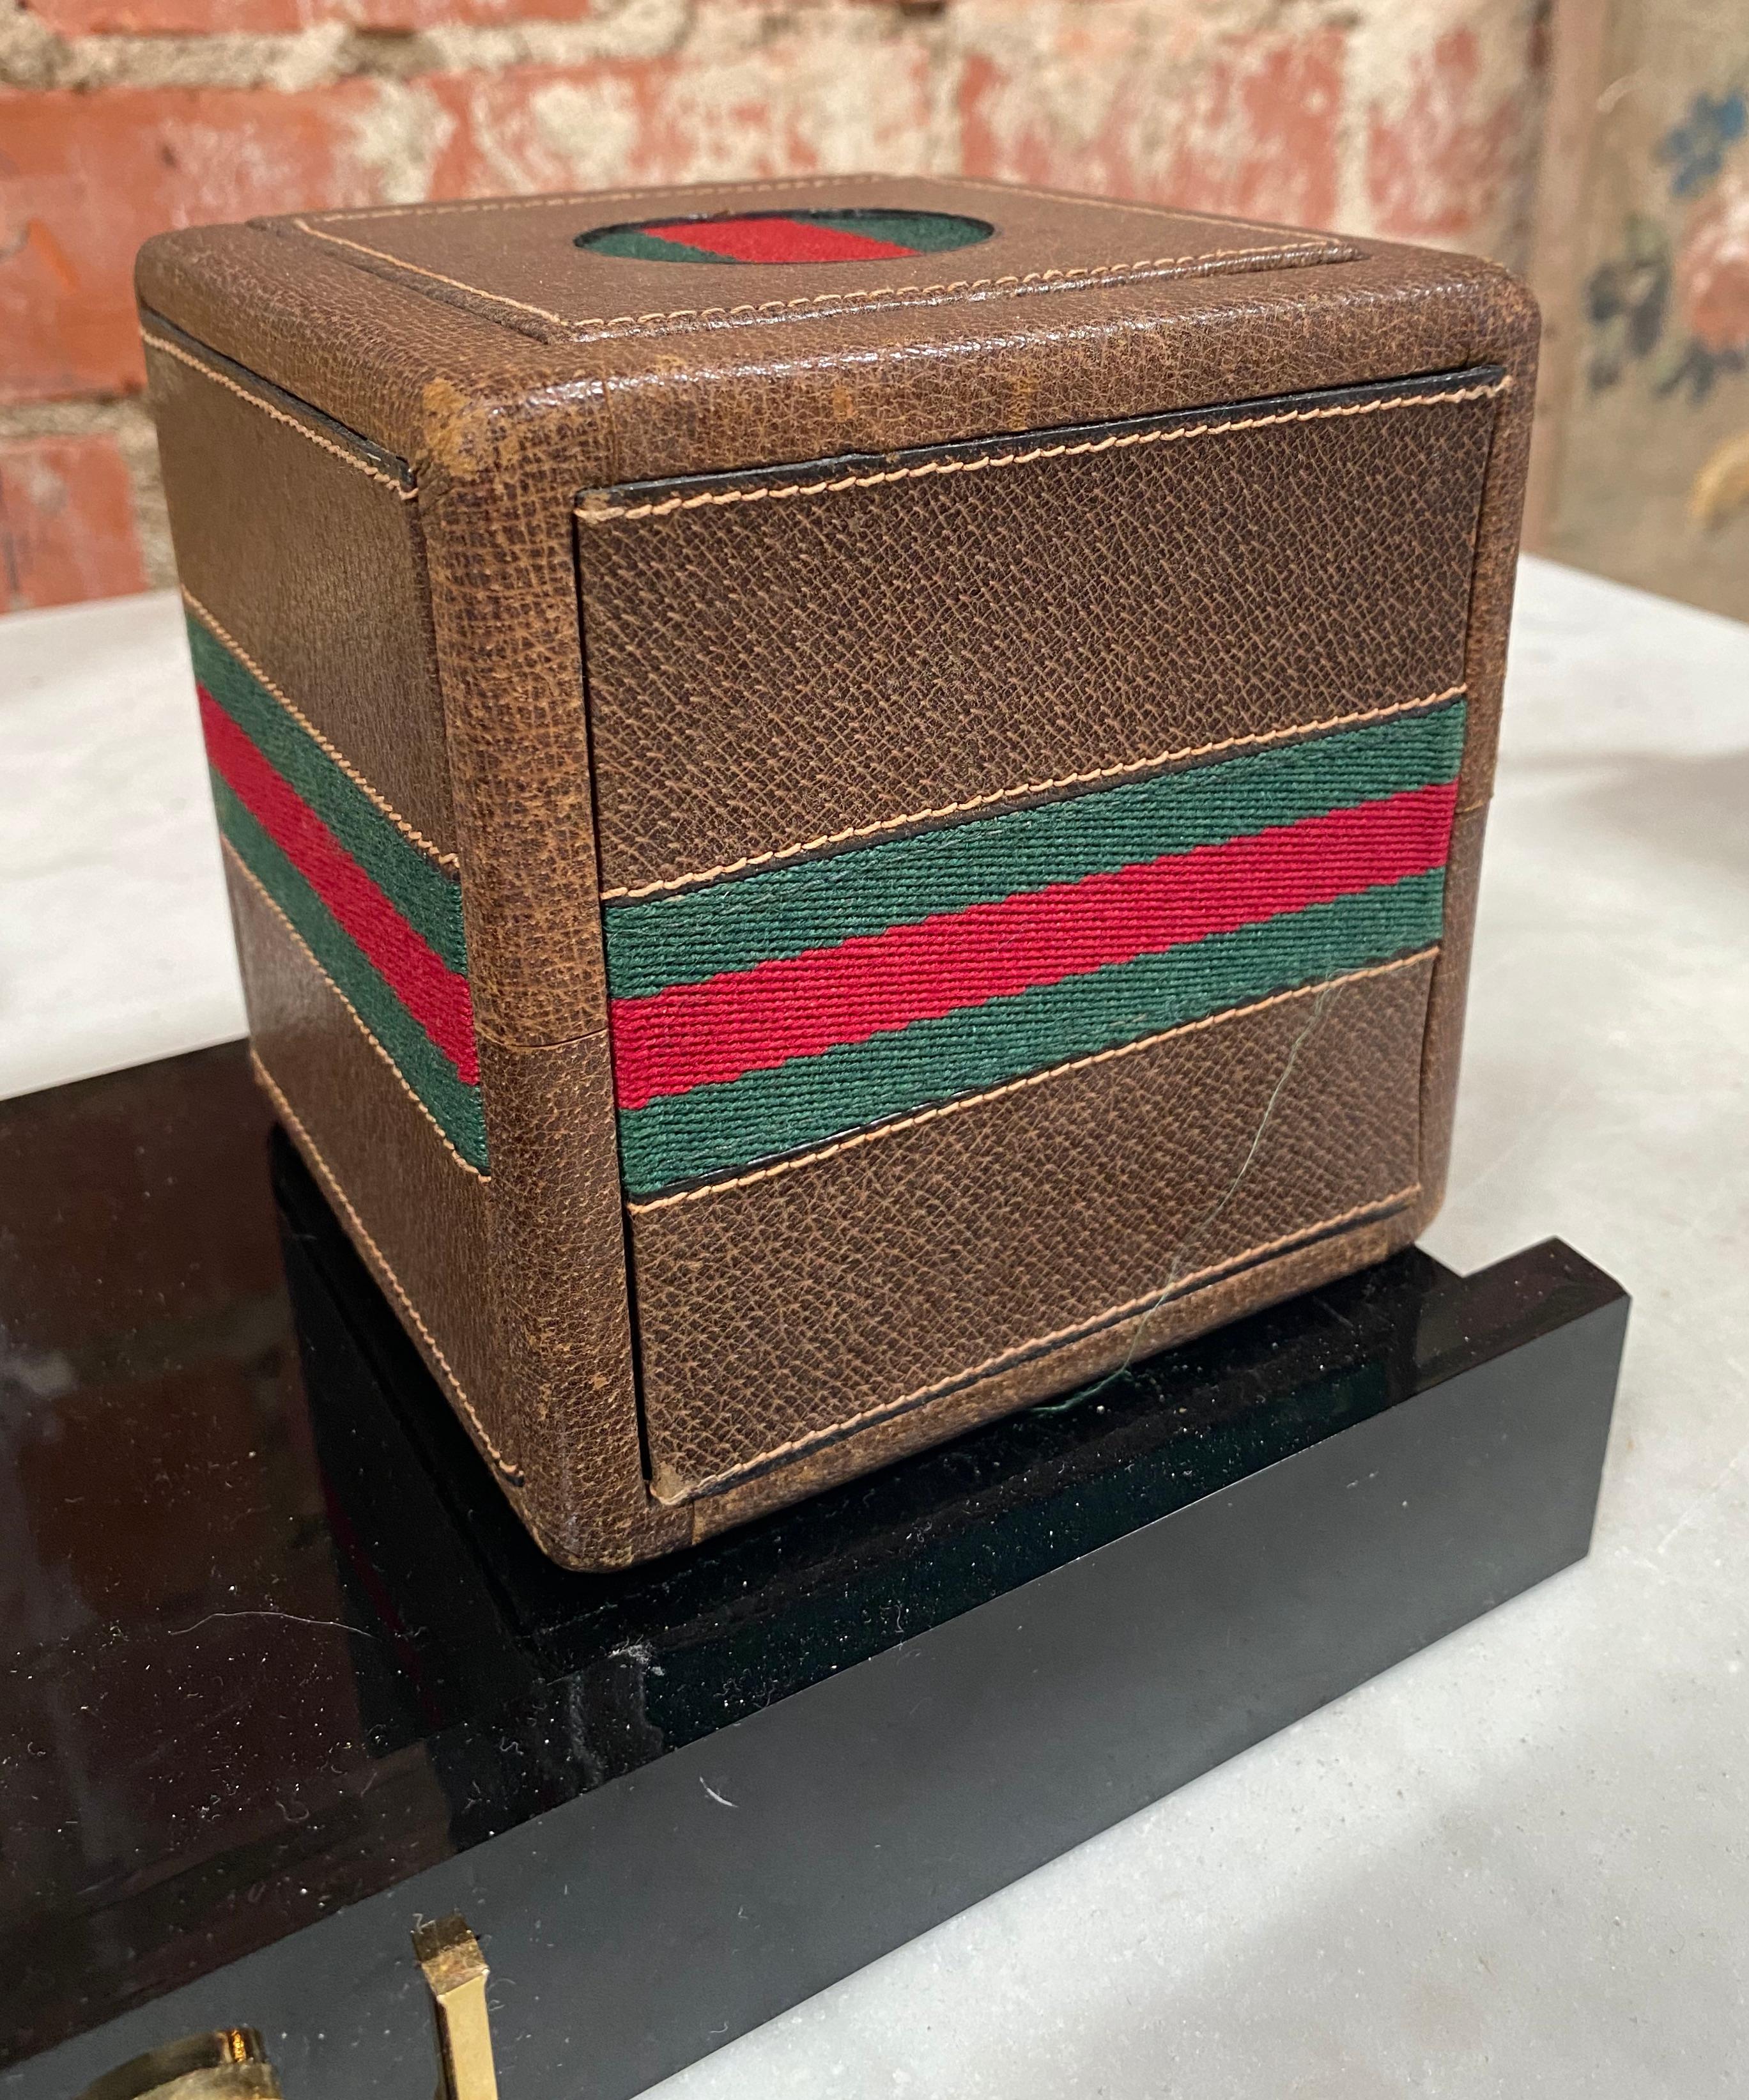 Saddle leather cube gaming set with sliding compartment replete with multiple Bakelite gaming chips, circa 1970s!